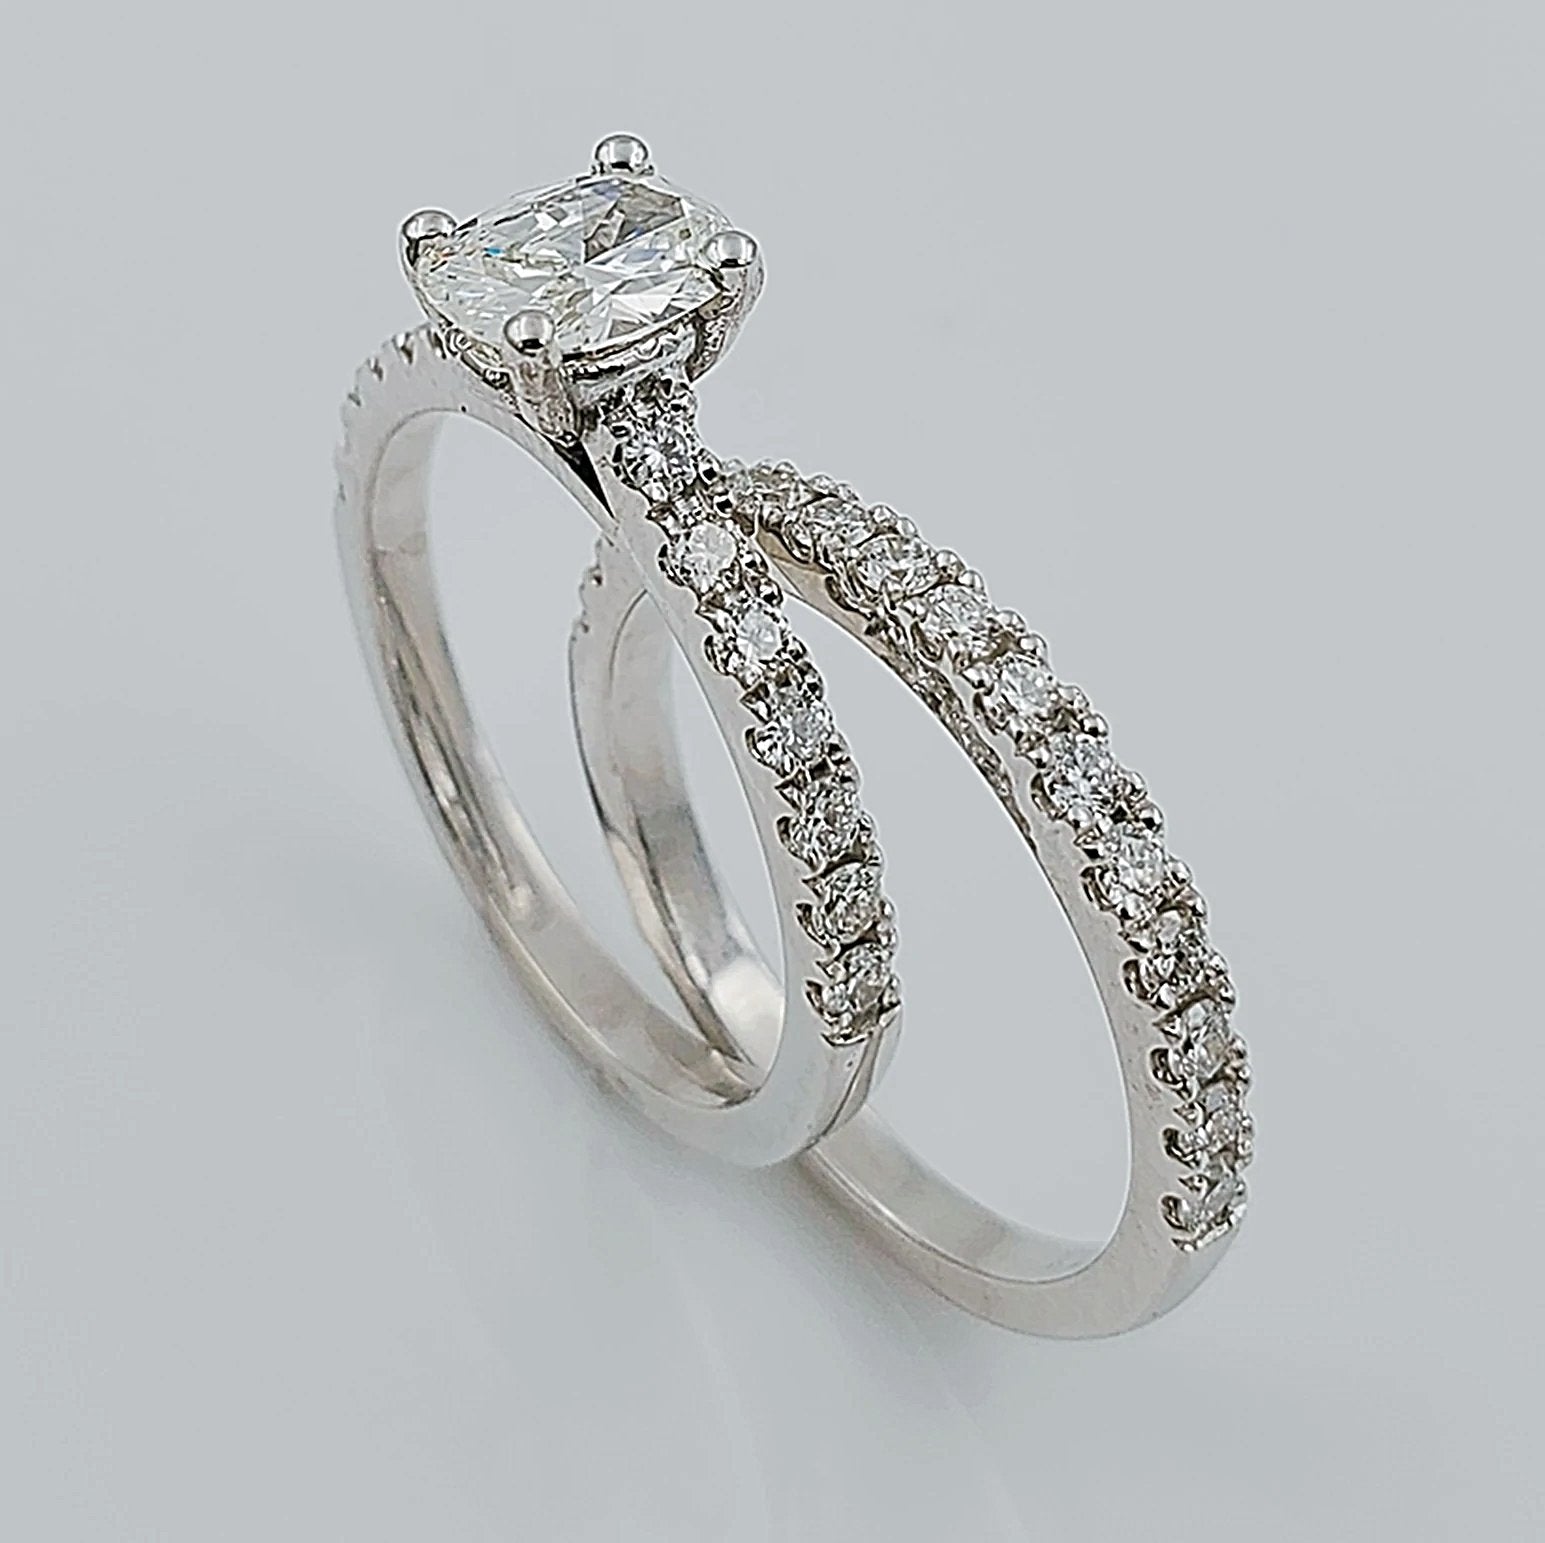 Women's 14K White Gold with Oval 0.64 CT Center (SI Color I) Diamond 4.9 GR Total Weight Bridal Ring Set. (Size: 6.0)